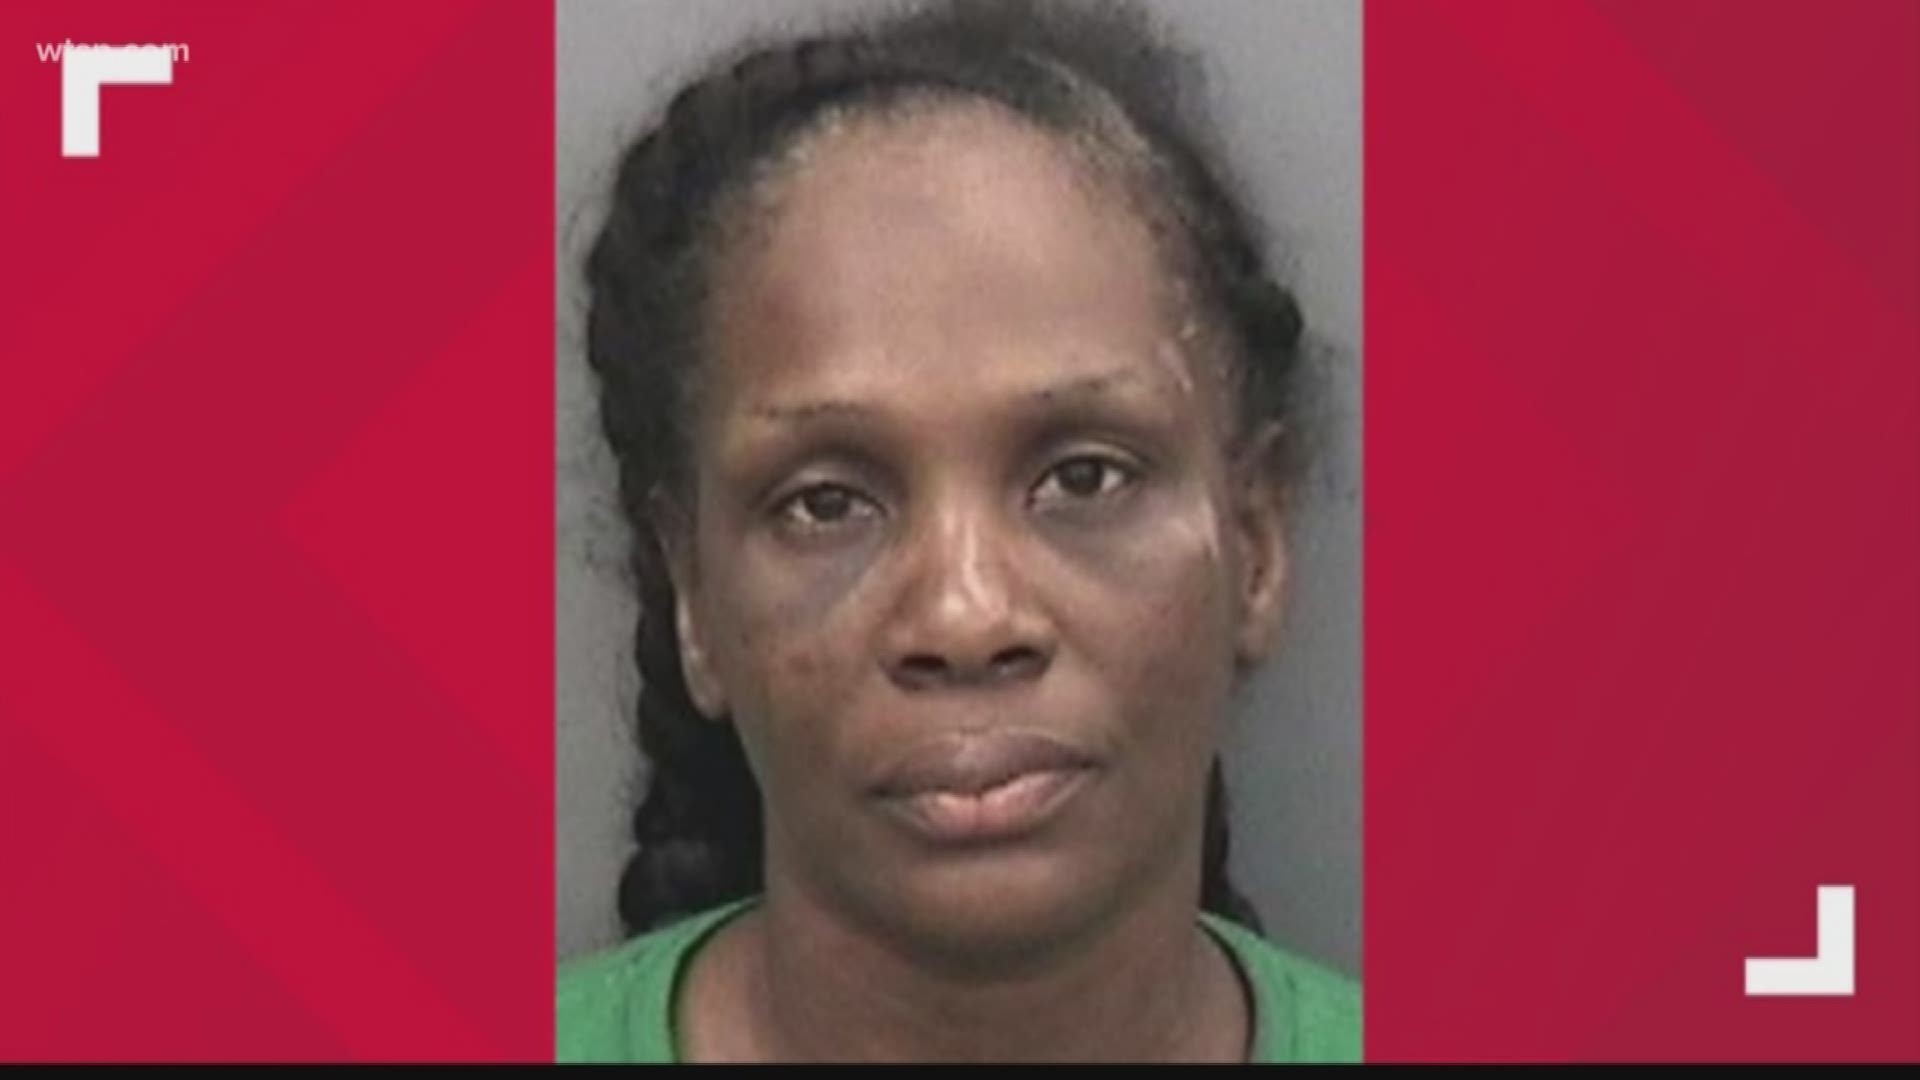 A woman was driving drunk, with her 10-month old granddaughter on her lap, when she crashed and injured the baby, according to Florida Highway Patrol.